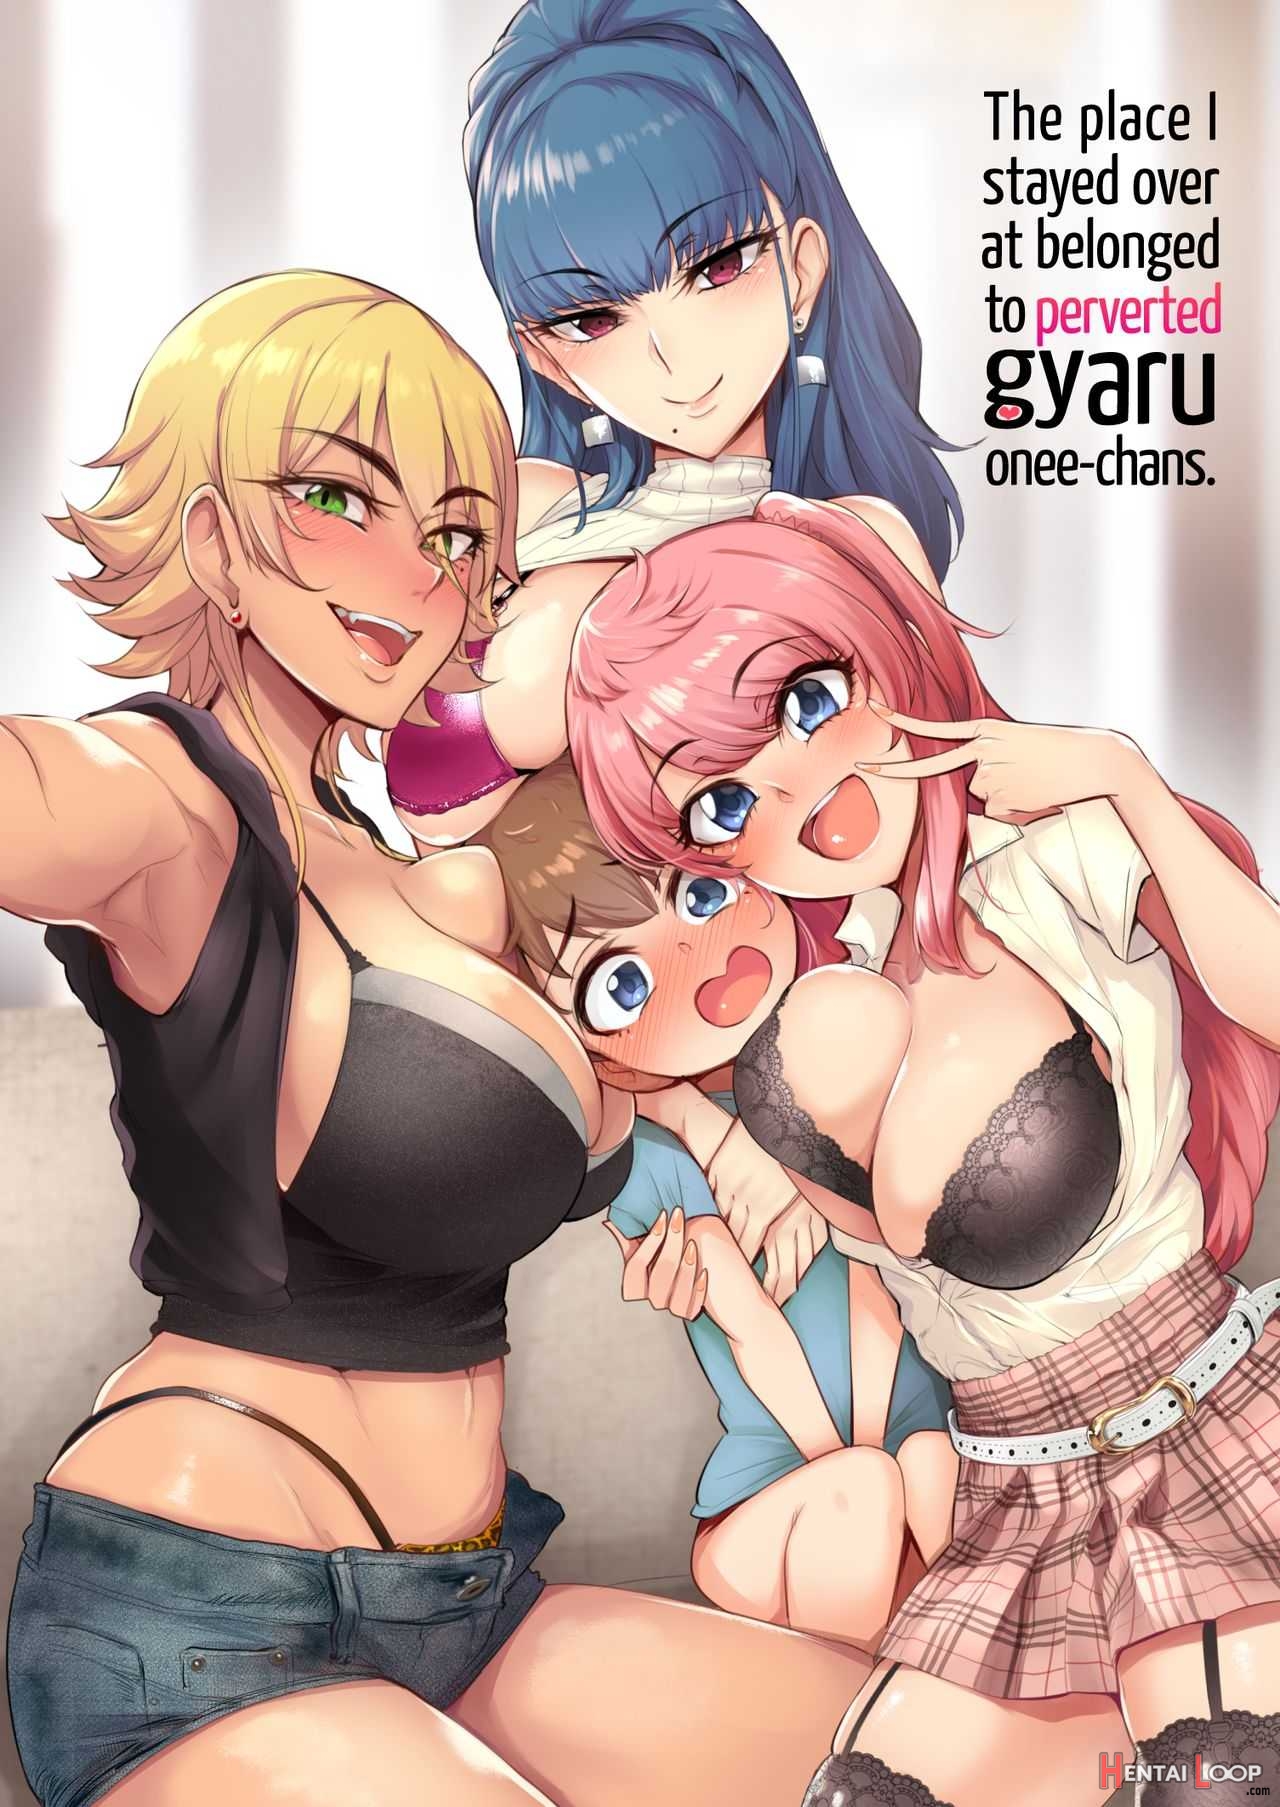 The Place I Stayed Over At Belonged To Perverted Gyaru Onee-chans page 1